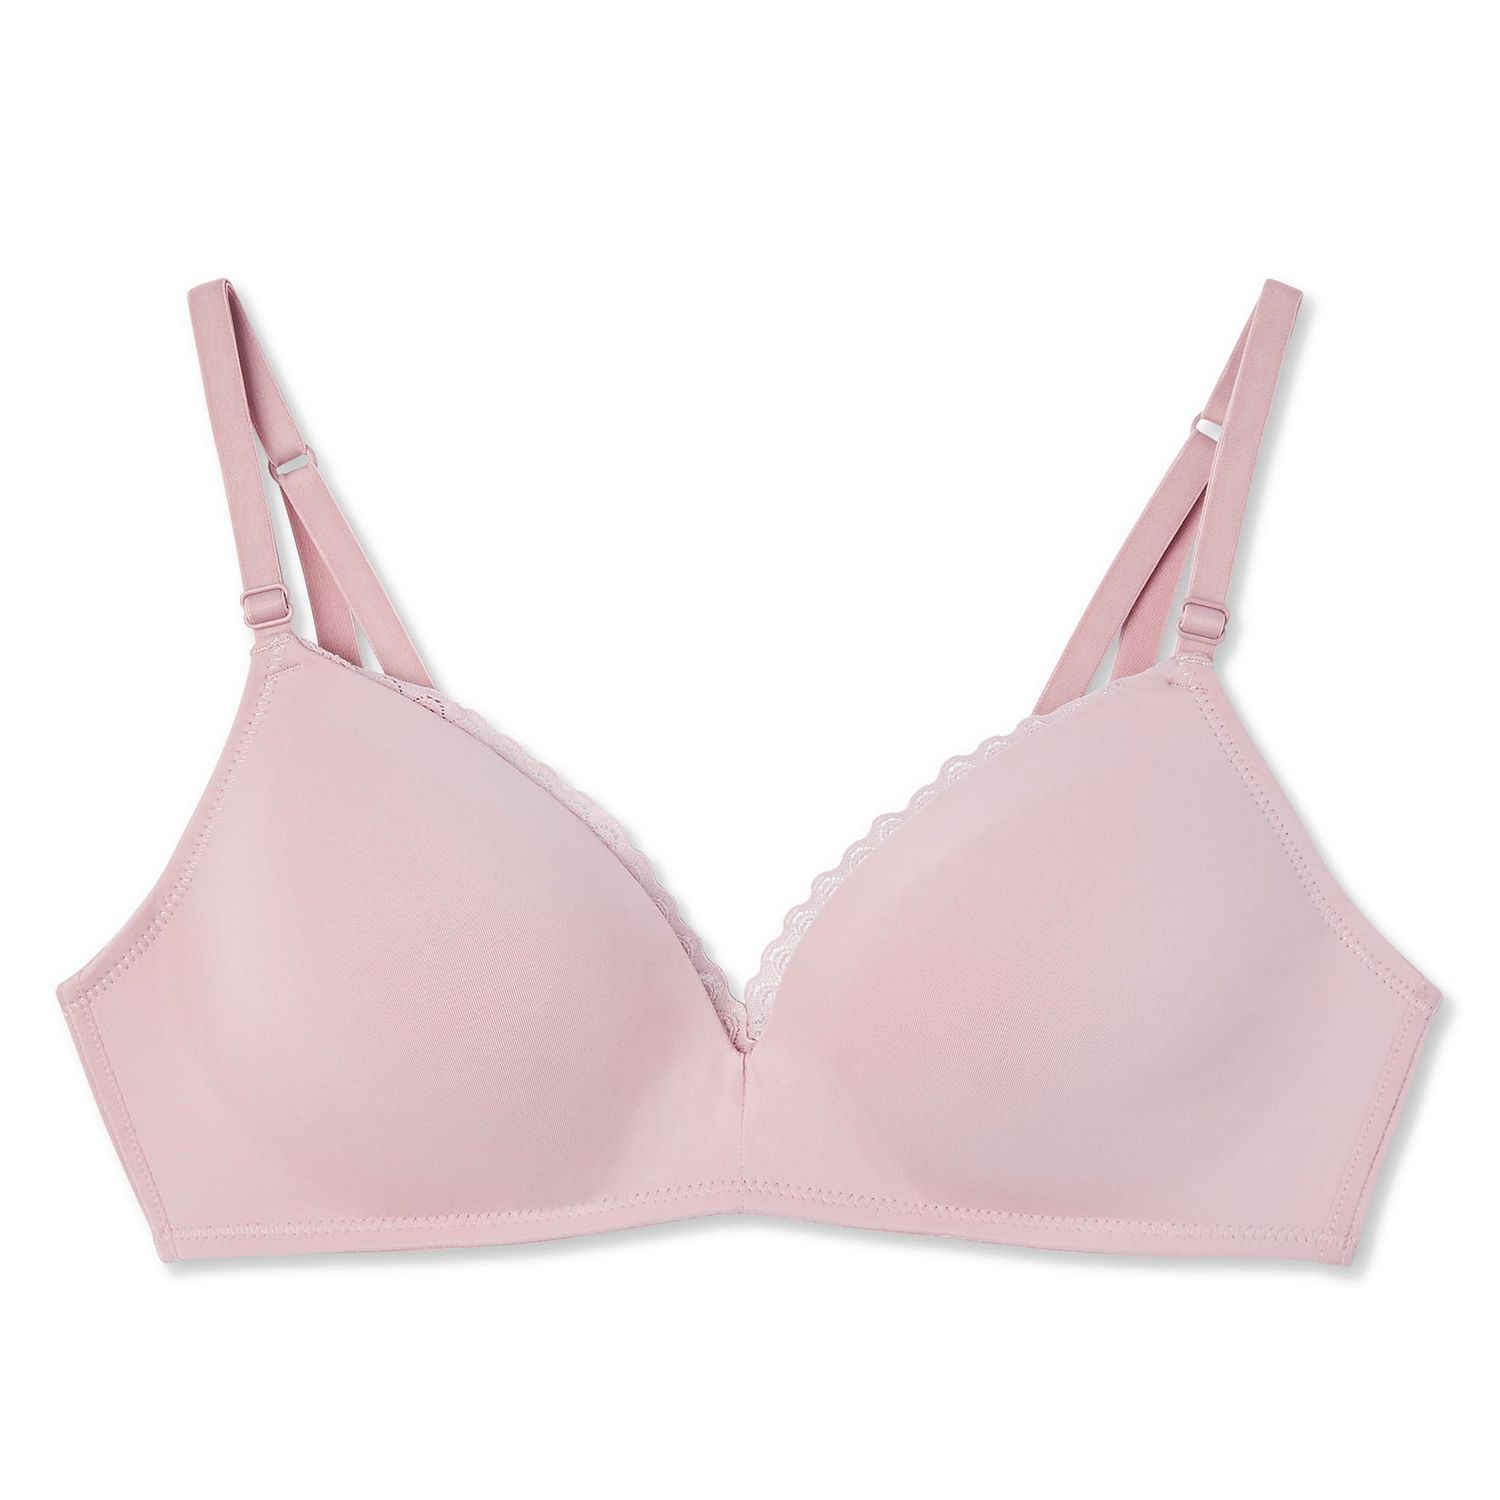 George Women's Seamless Bra with Molded Cups 